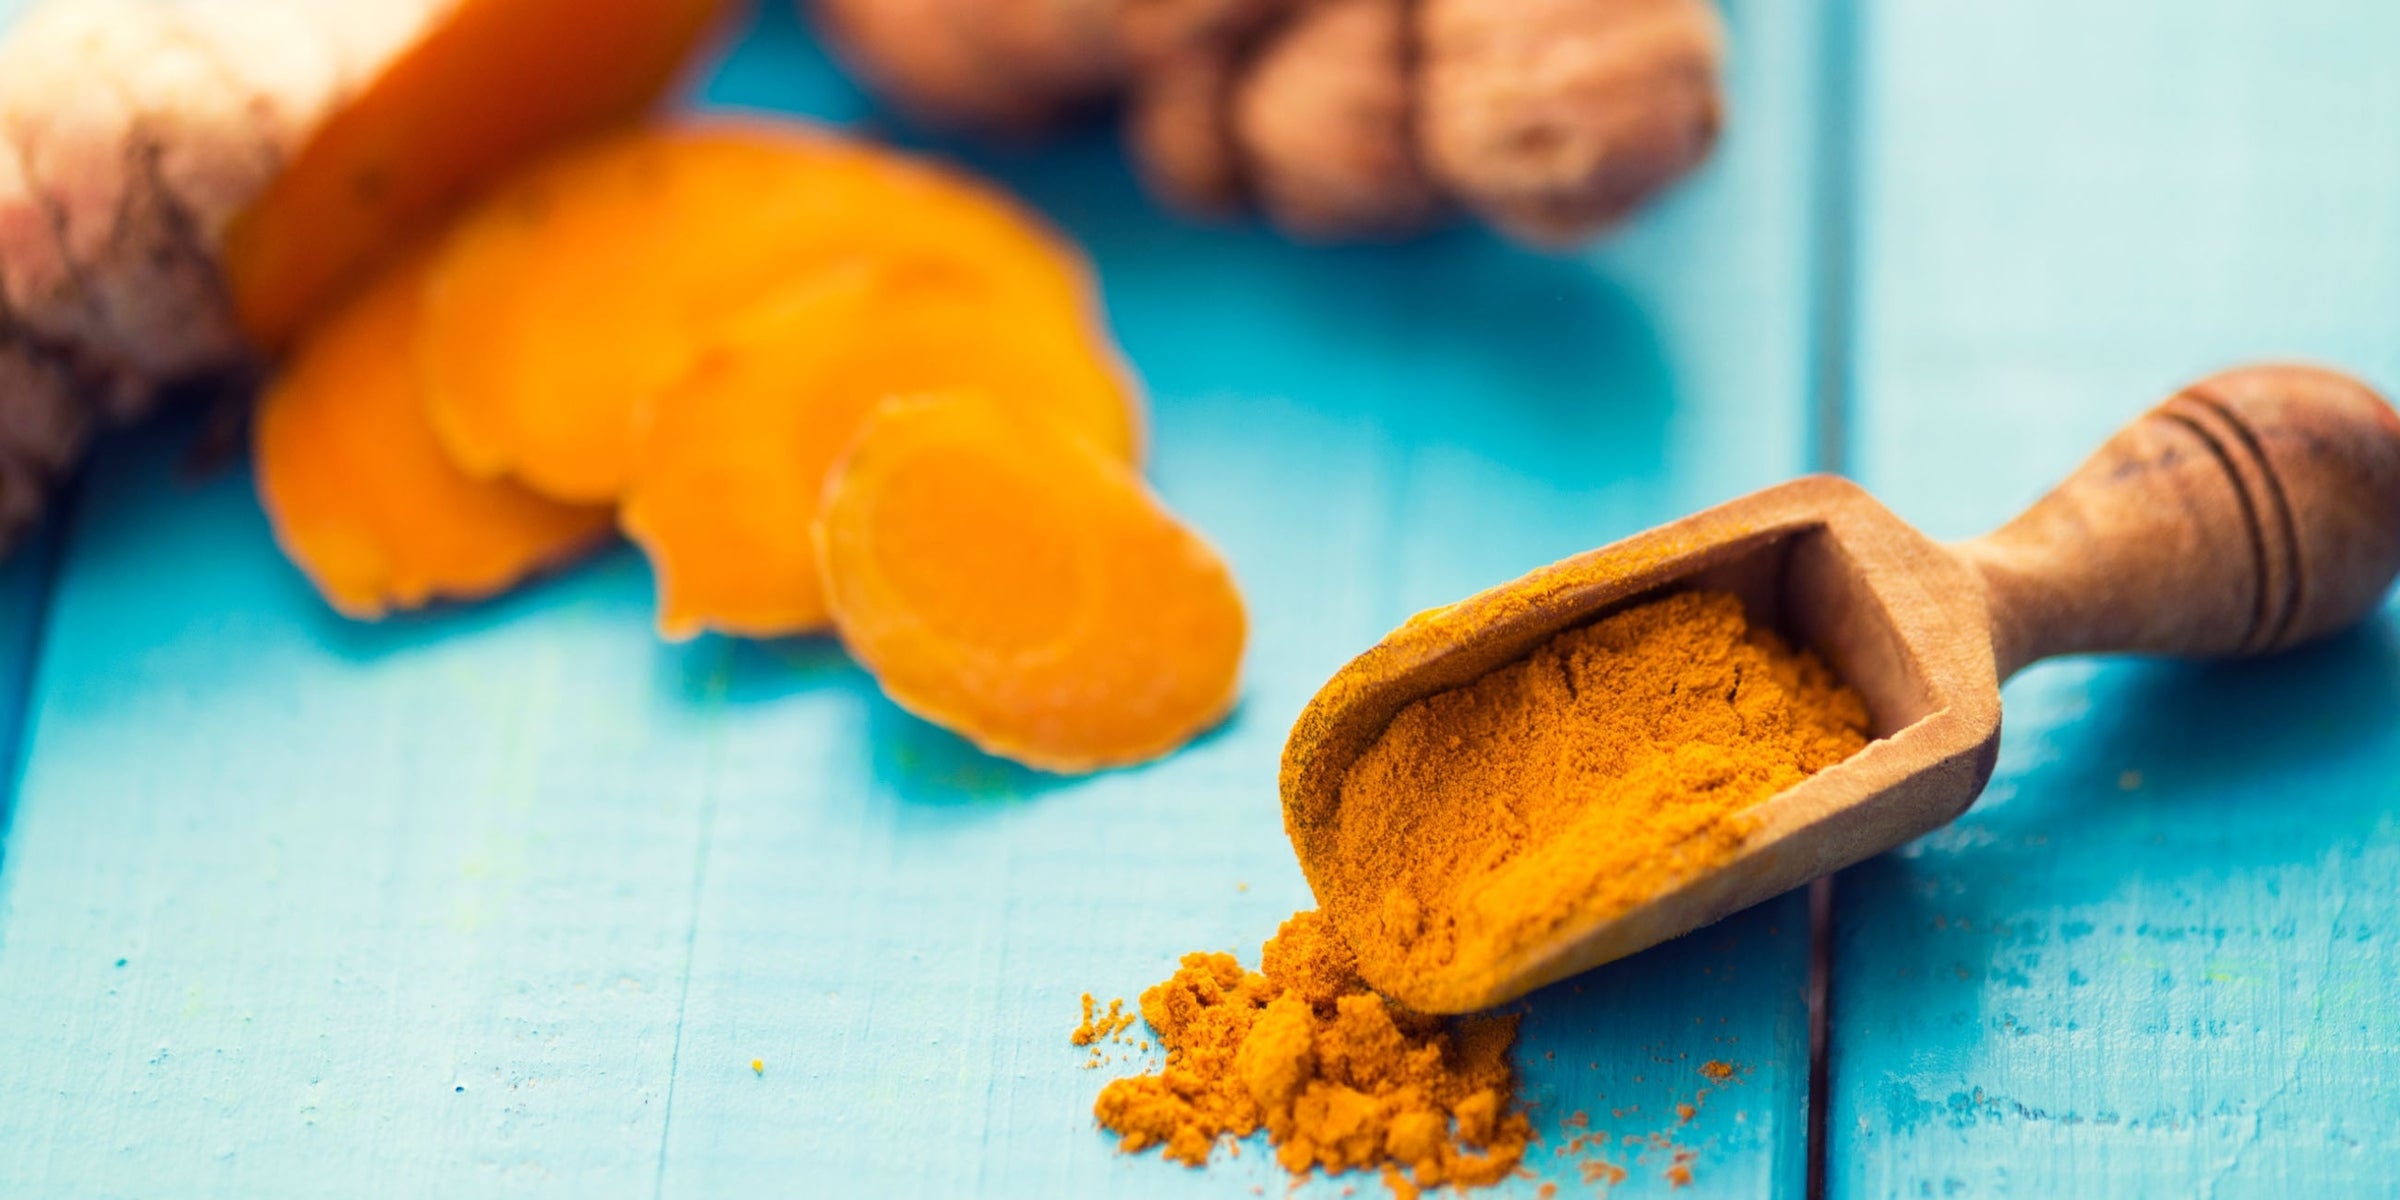 Learn About The Health Benefits of Turmeric